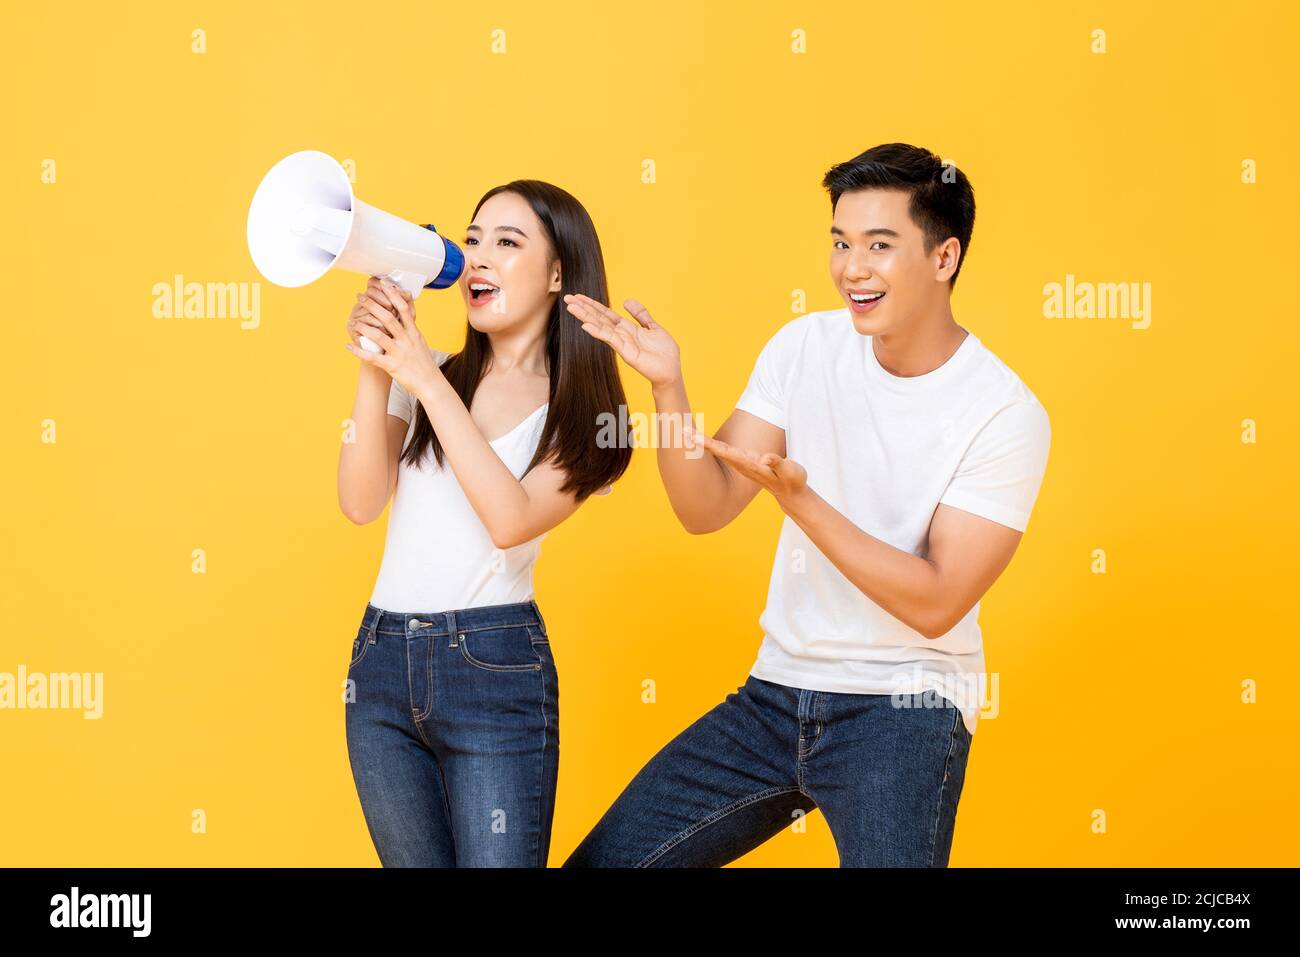 Cheerful portrait of smiling happy young Asian couple making announcement and presenting in isolated studio yellow background Stock Photo